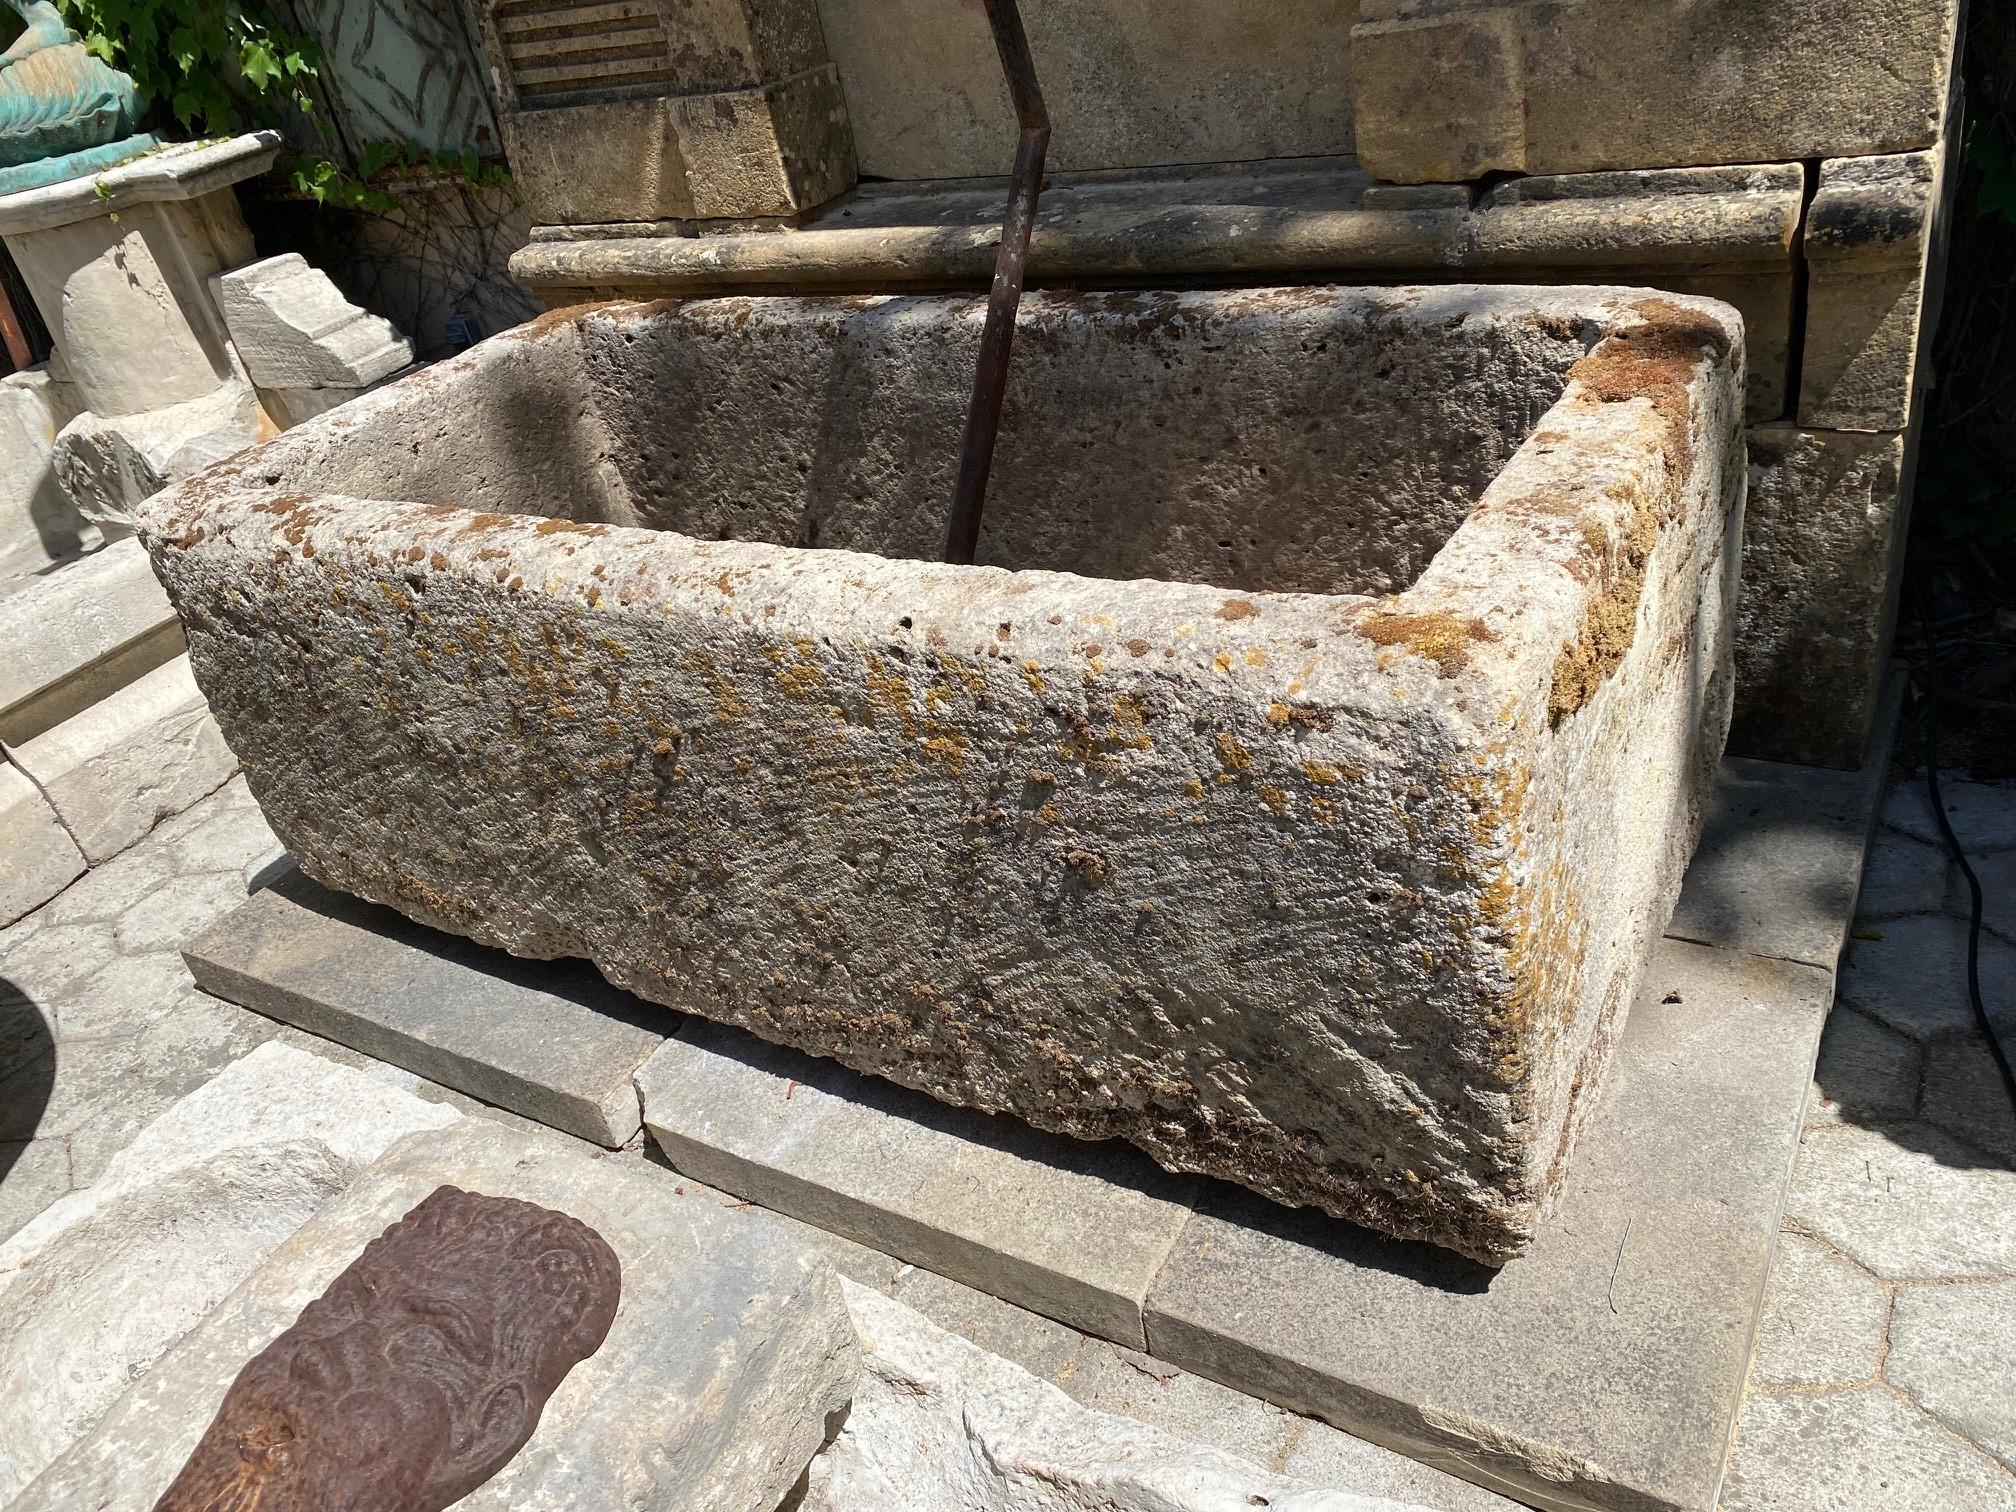 Hand carved stone container fountain basin tub planter firepit trough antique LA. Exquisite 18th century water fountain basin of hand carved stone. This trough could be installed with a simple bronze spout or a carved stone fountain head, we have